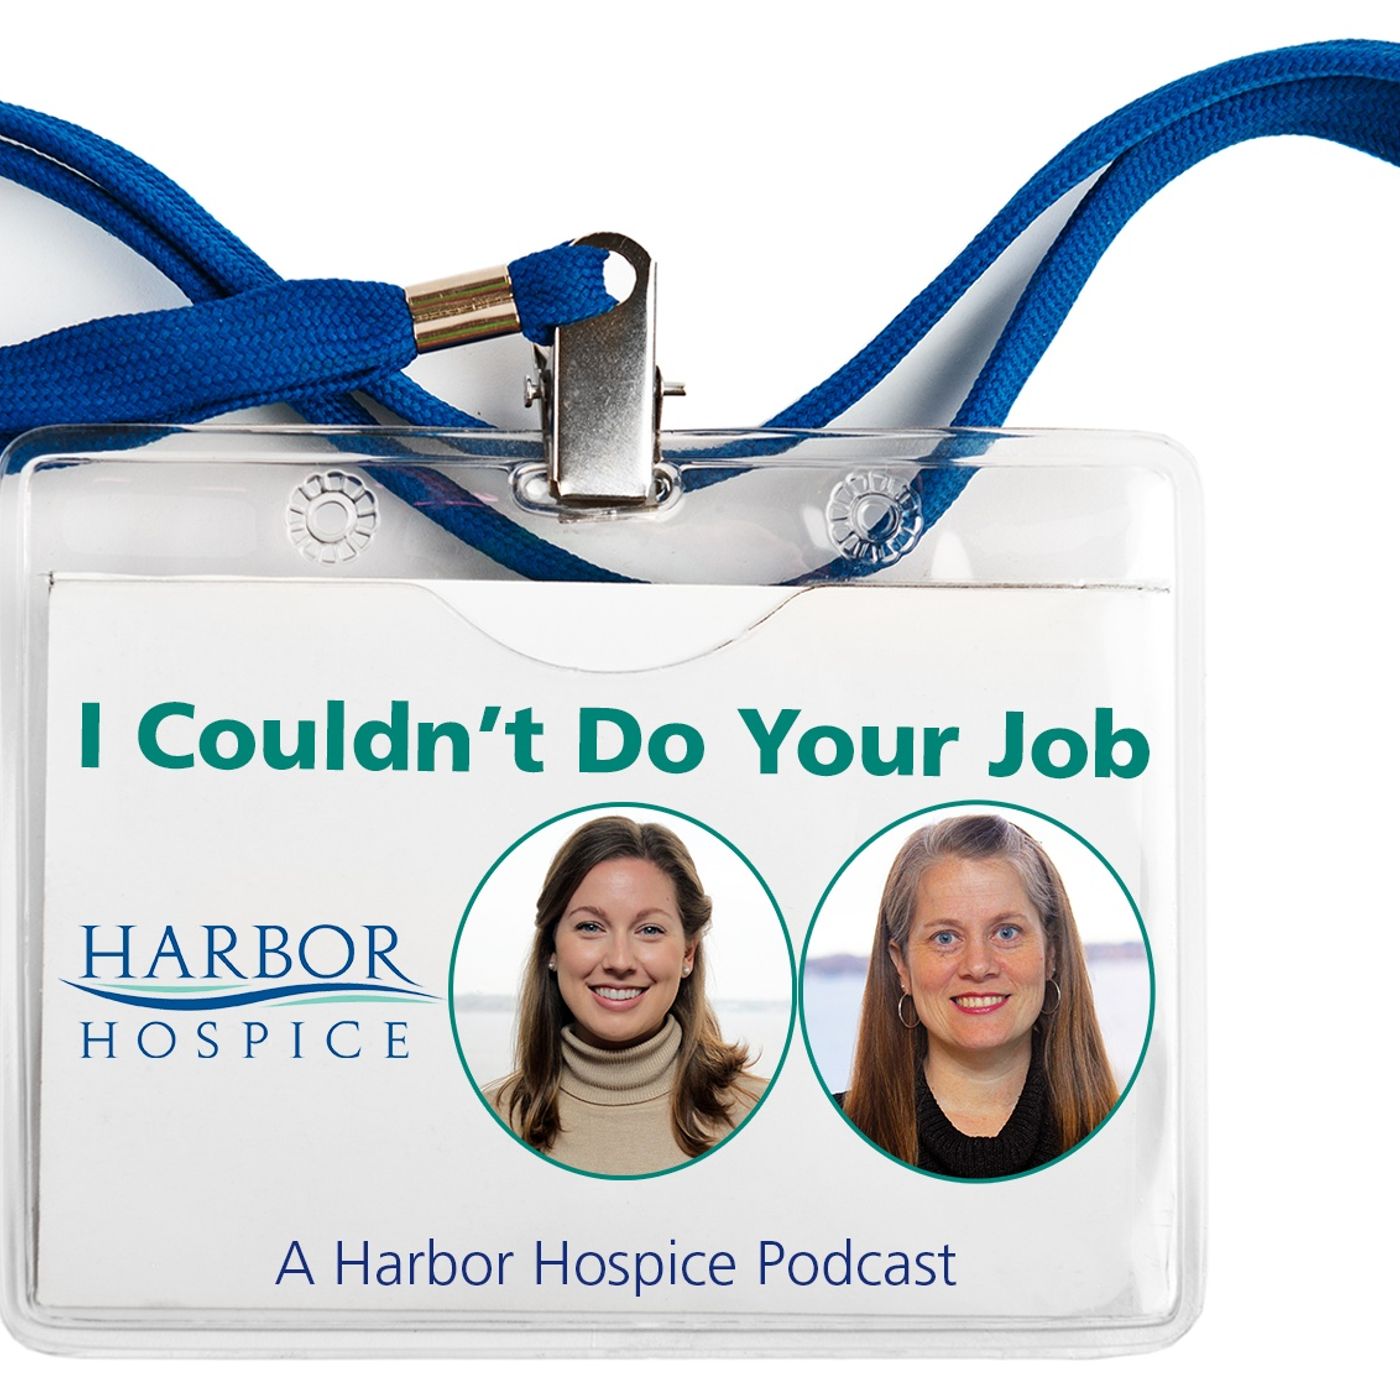 I Couldn’t Do Your Job, A Harbor Hospice Podcast.